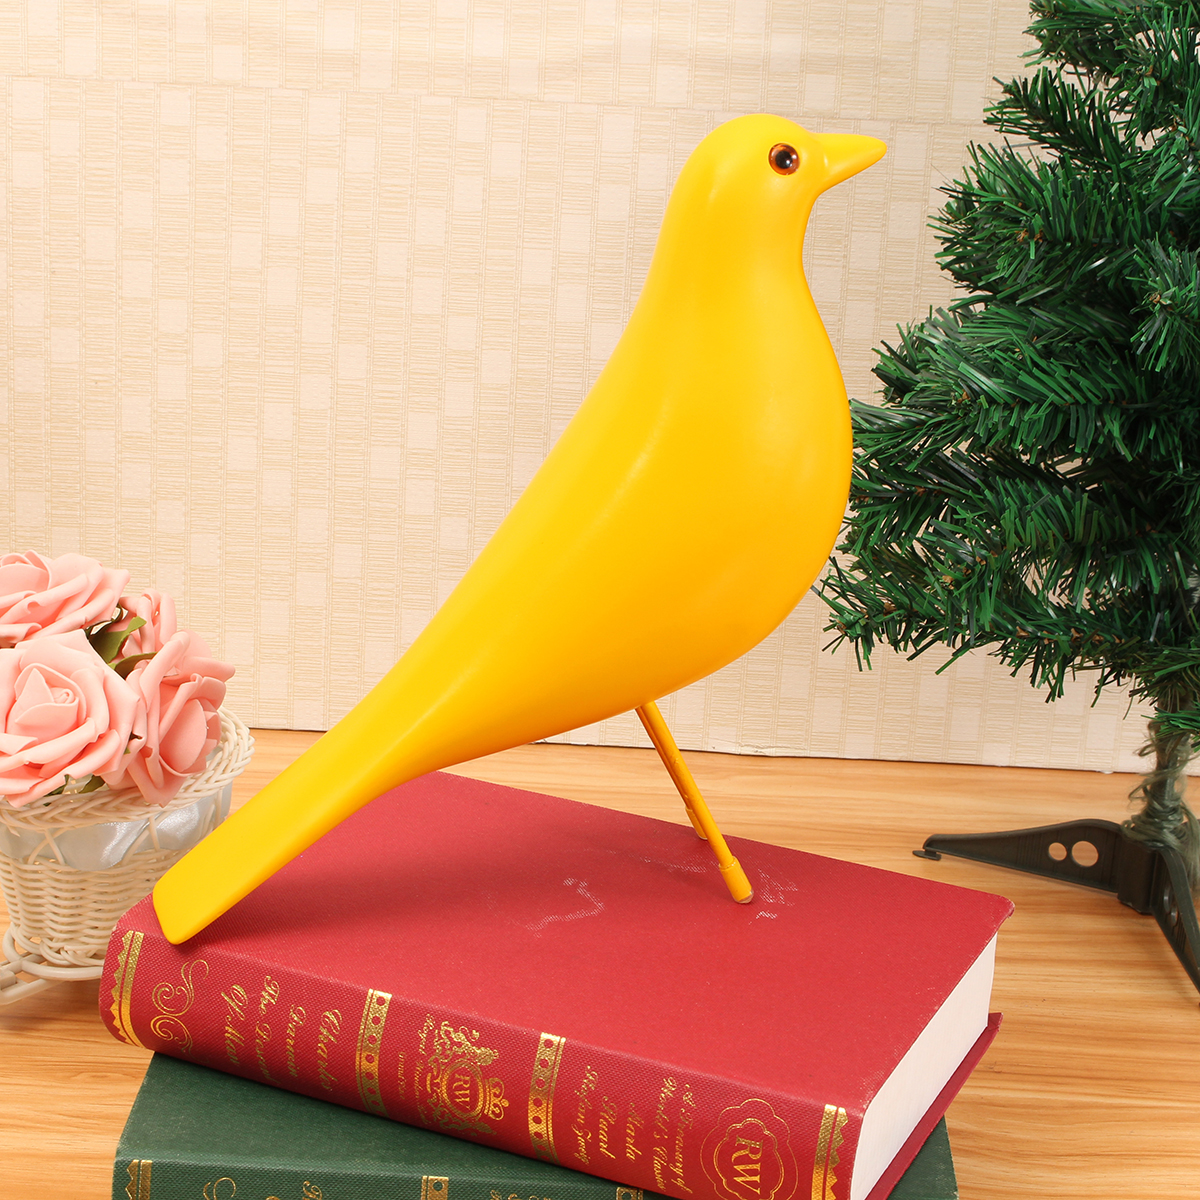 11-Bird-Desk-Ornament-House-Resin-Pigeon-Gift-Office-Home-Window-Table-Decorations-1641349-3